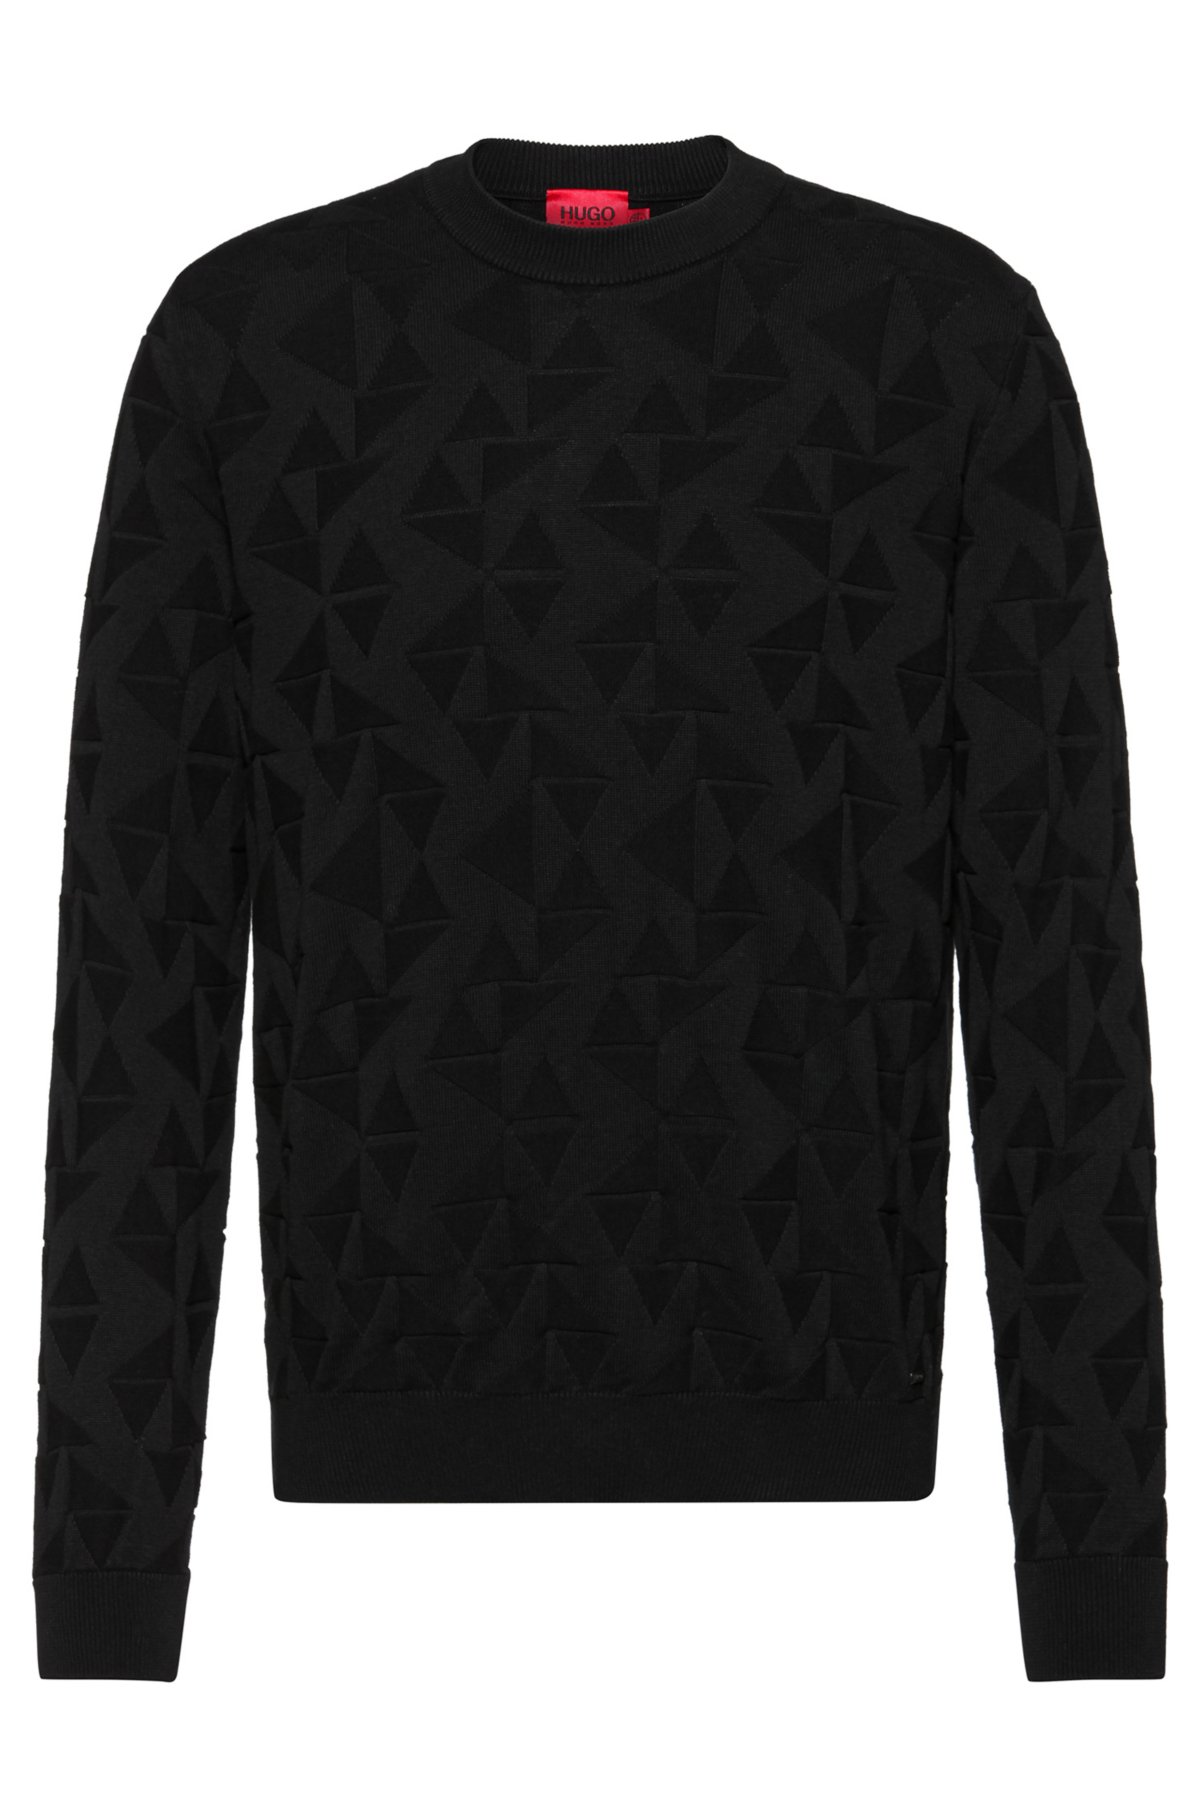 Louis Vuitton Mens Sweaters, Black, XL*Stock Confirmation Required